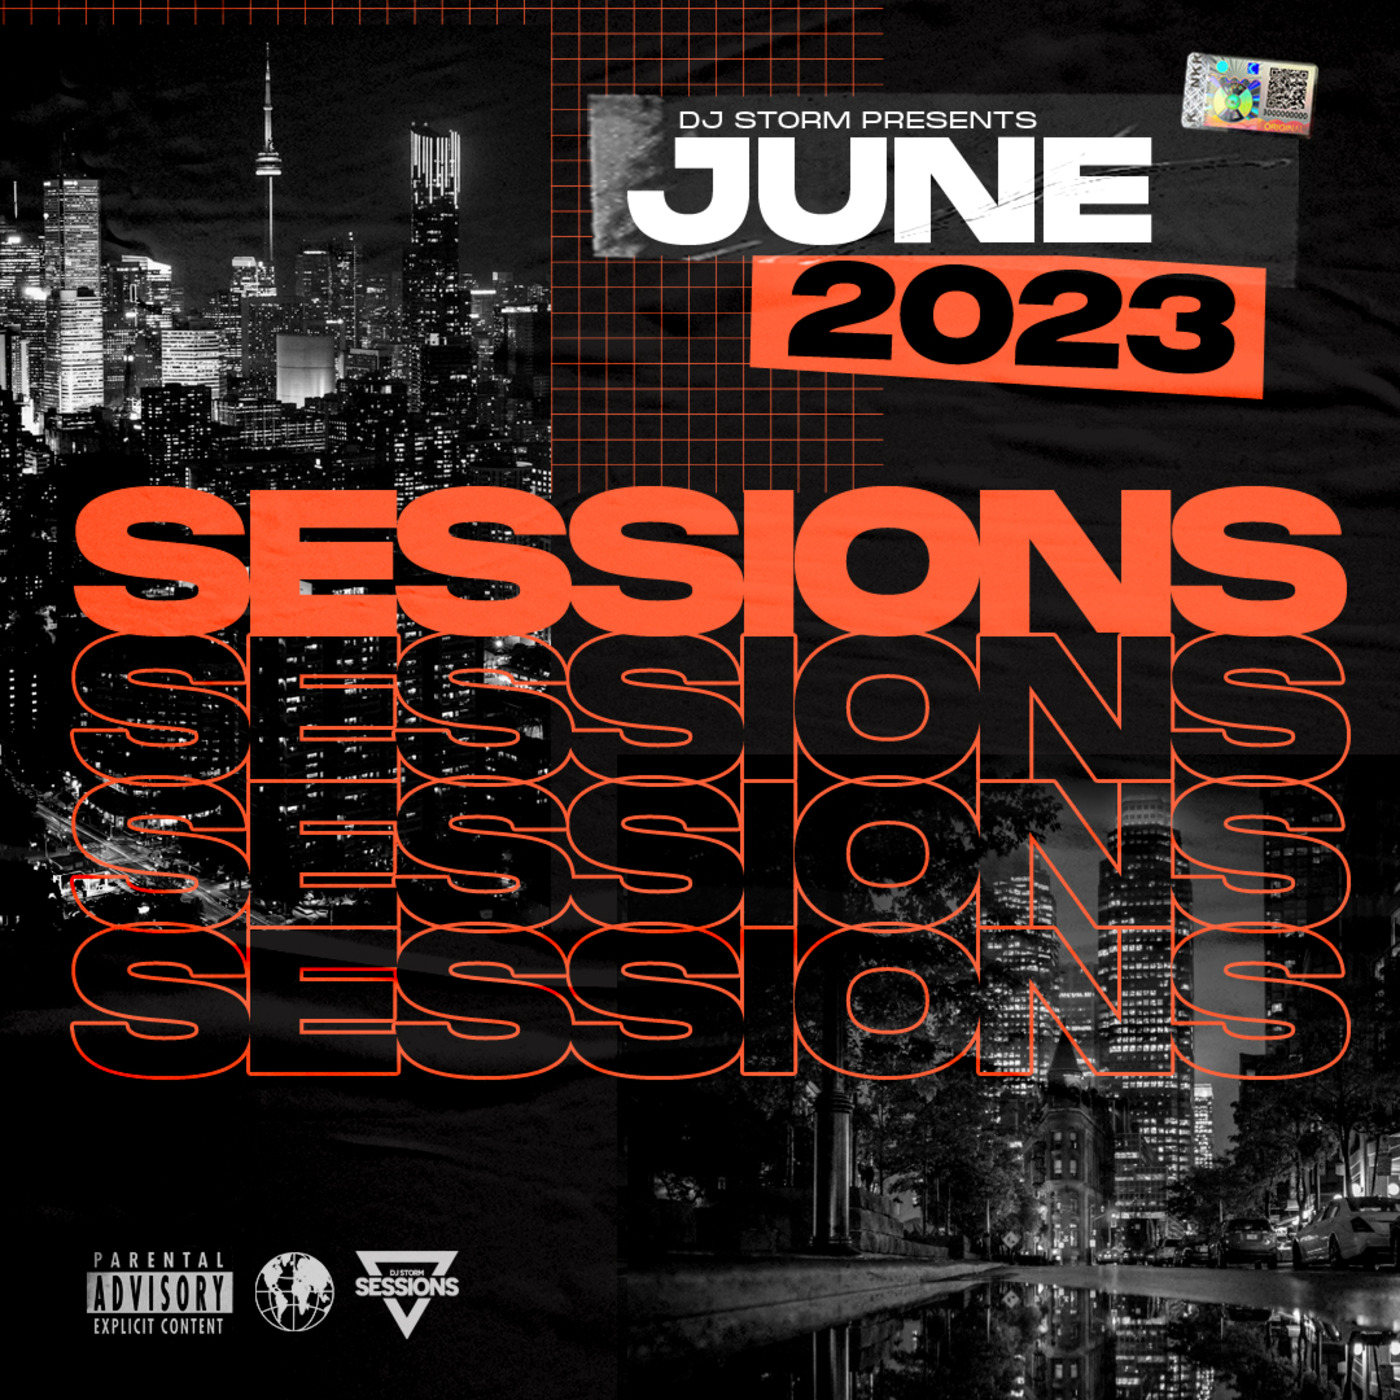 The Sessions - June 2023